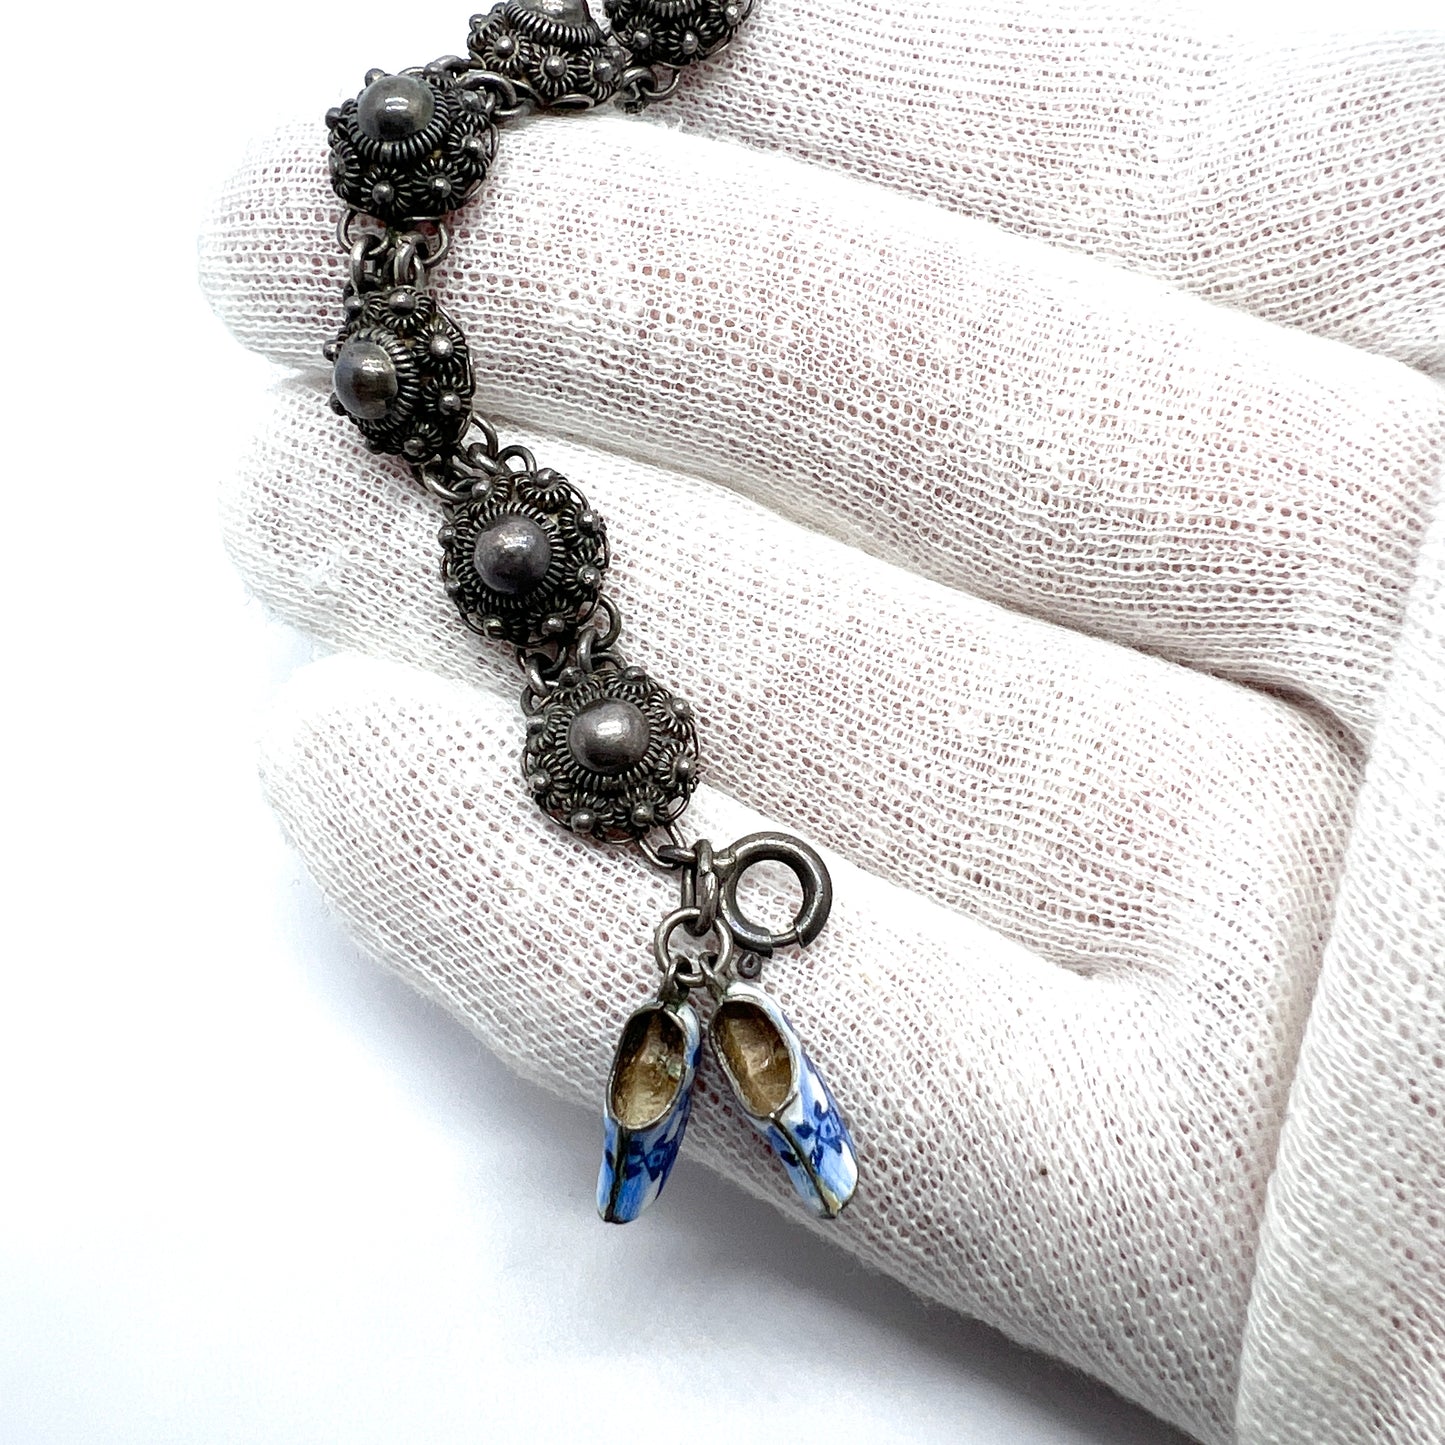 The Netherlands early to mid 1900s. Solid Silver Enamel Charm Bracelet.